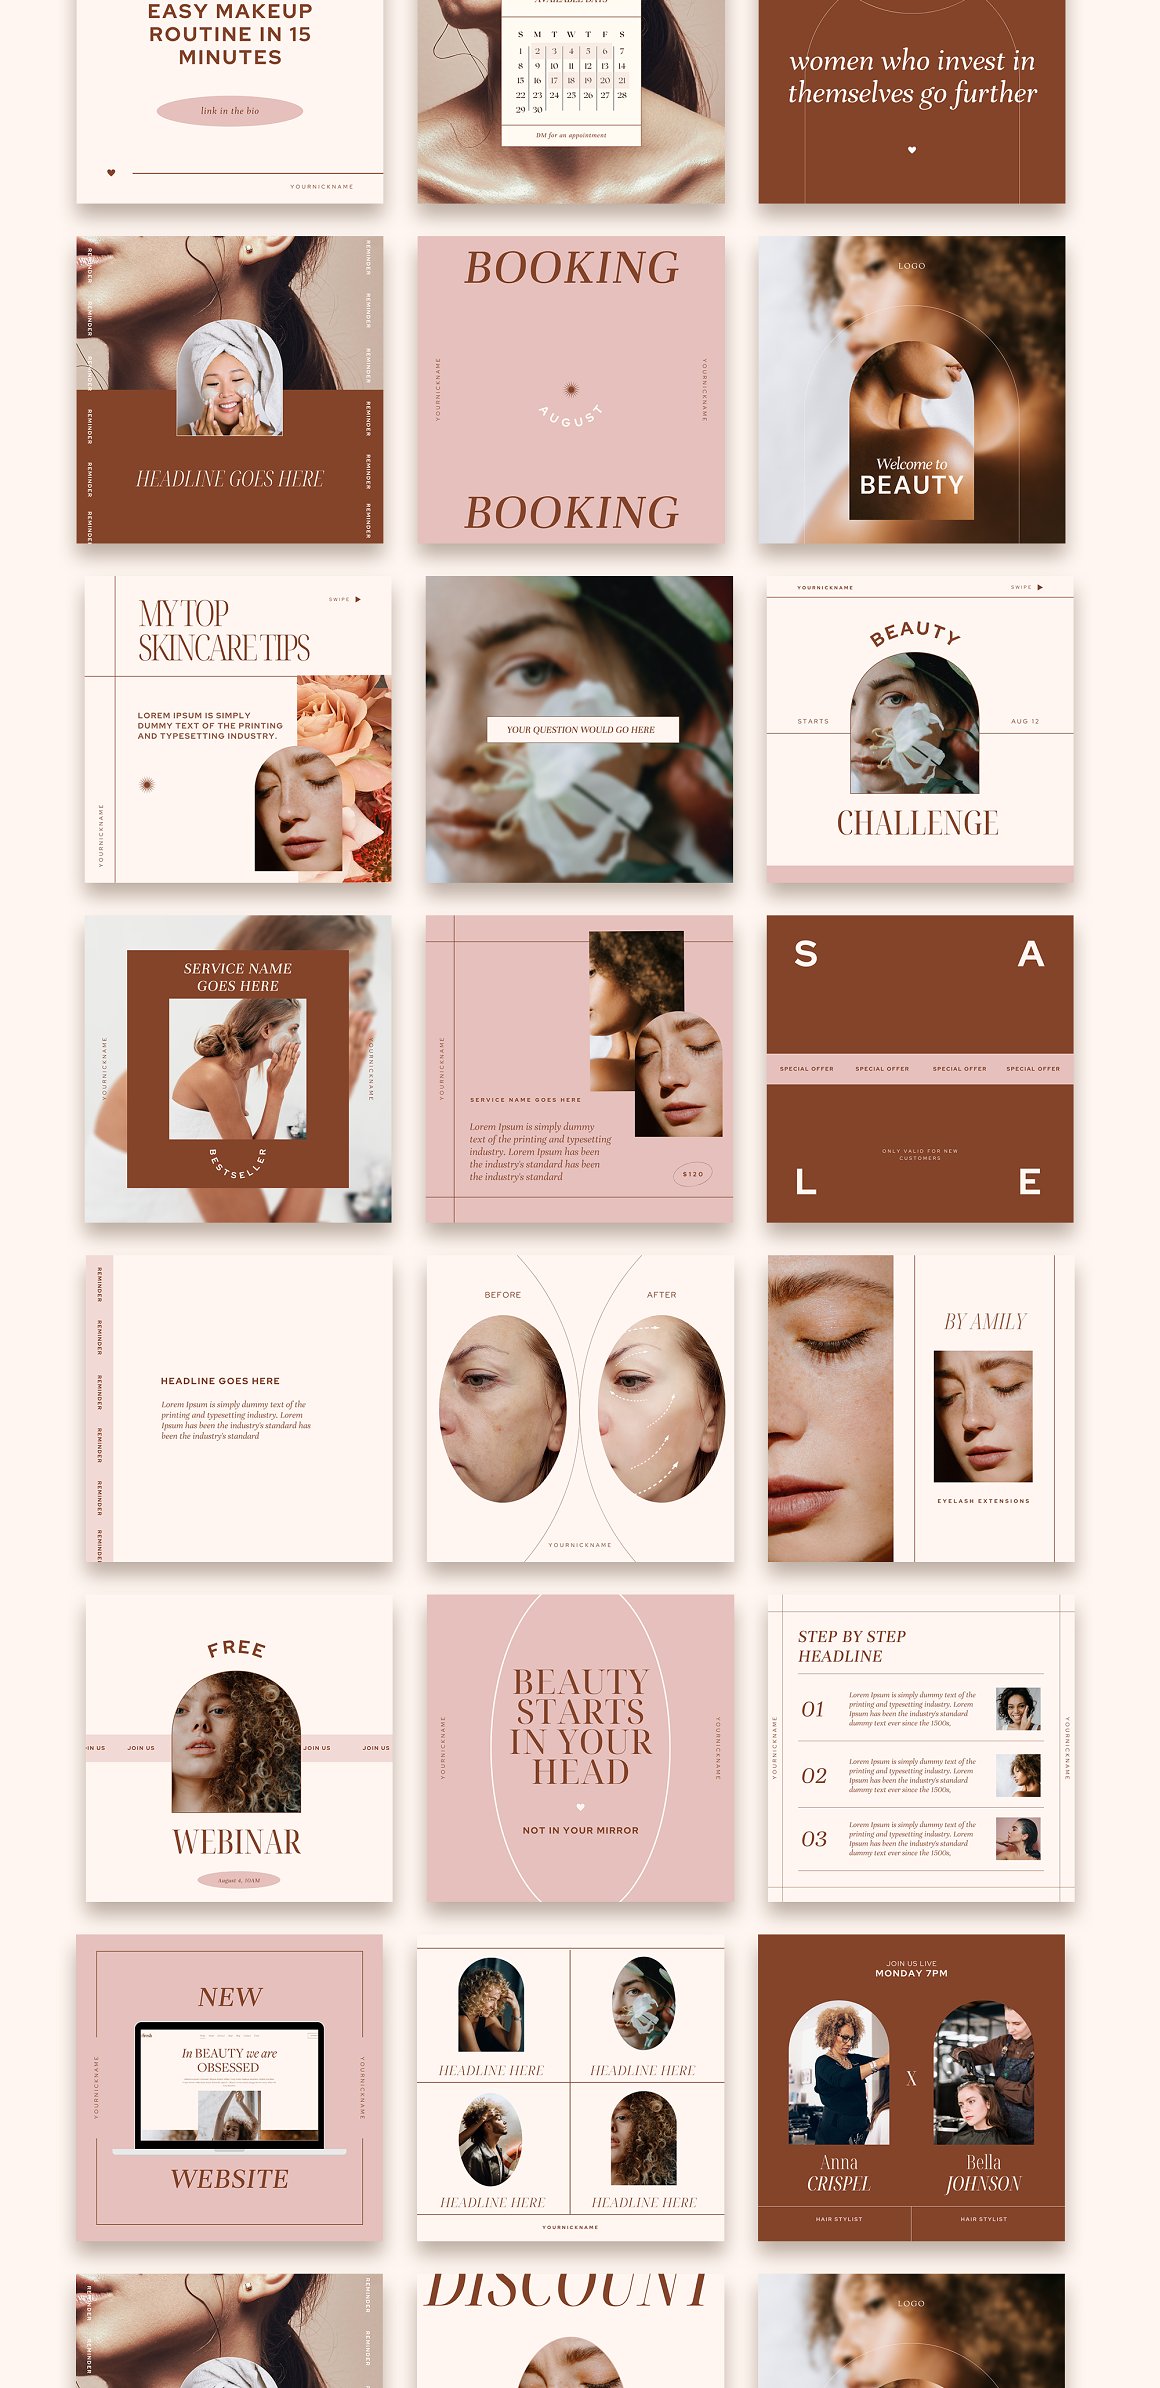 Facial grooming page templates.